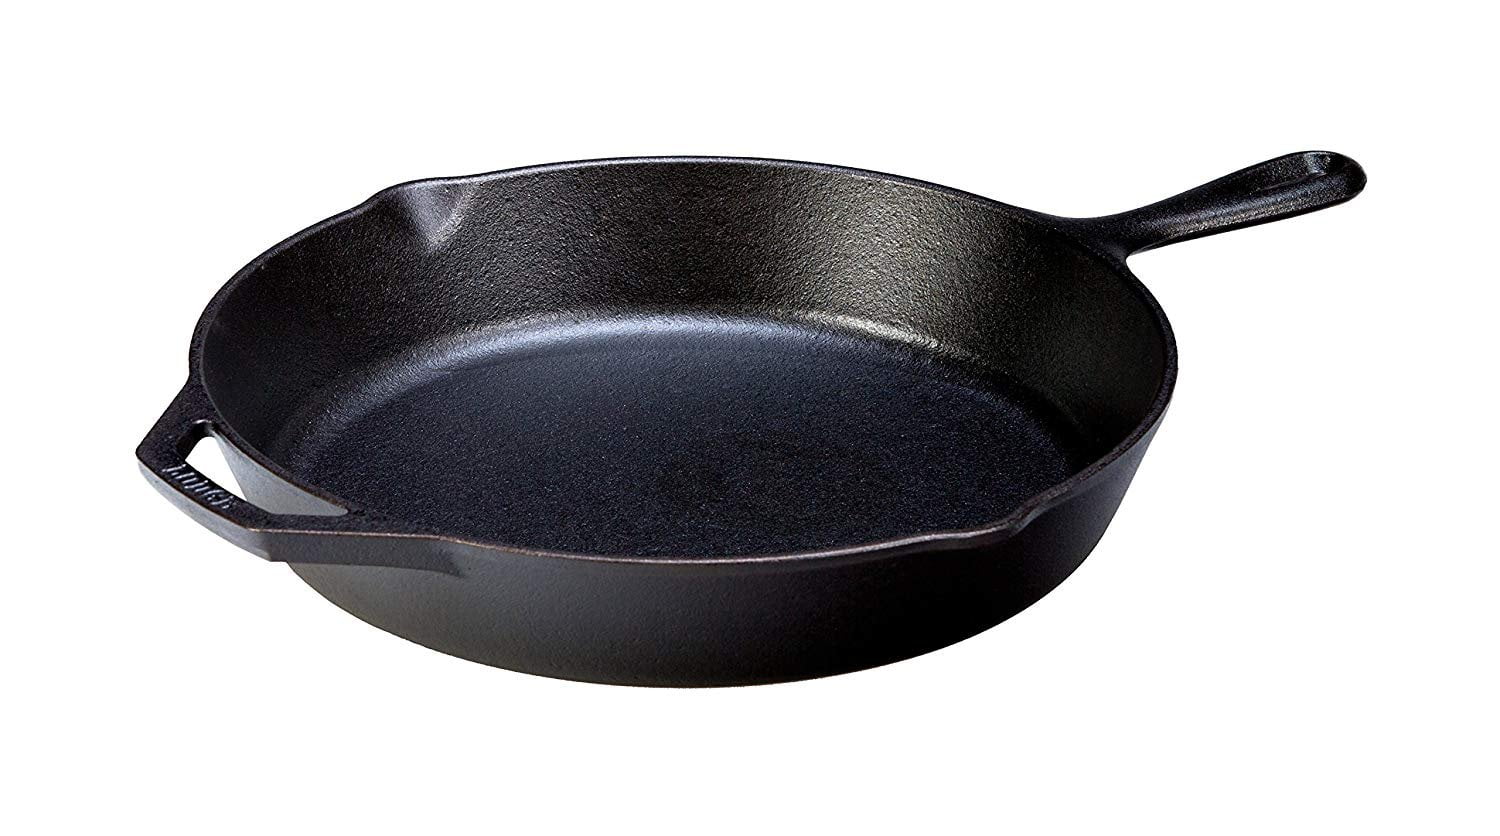 Lodge 13.25 Pre Seasoned Inch Cast Iron Skillet. Large Classic Cast Iron  Skillet for Family Size Meals 